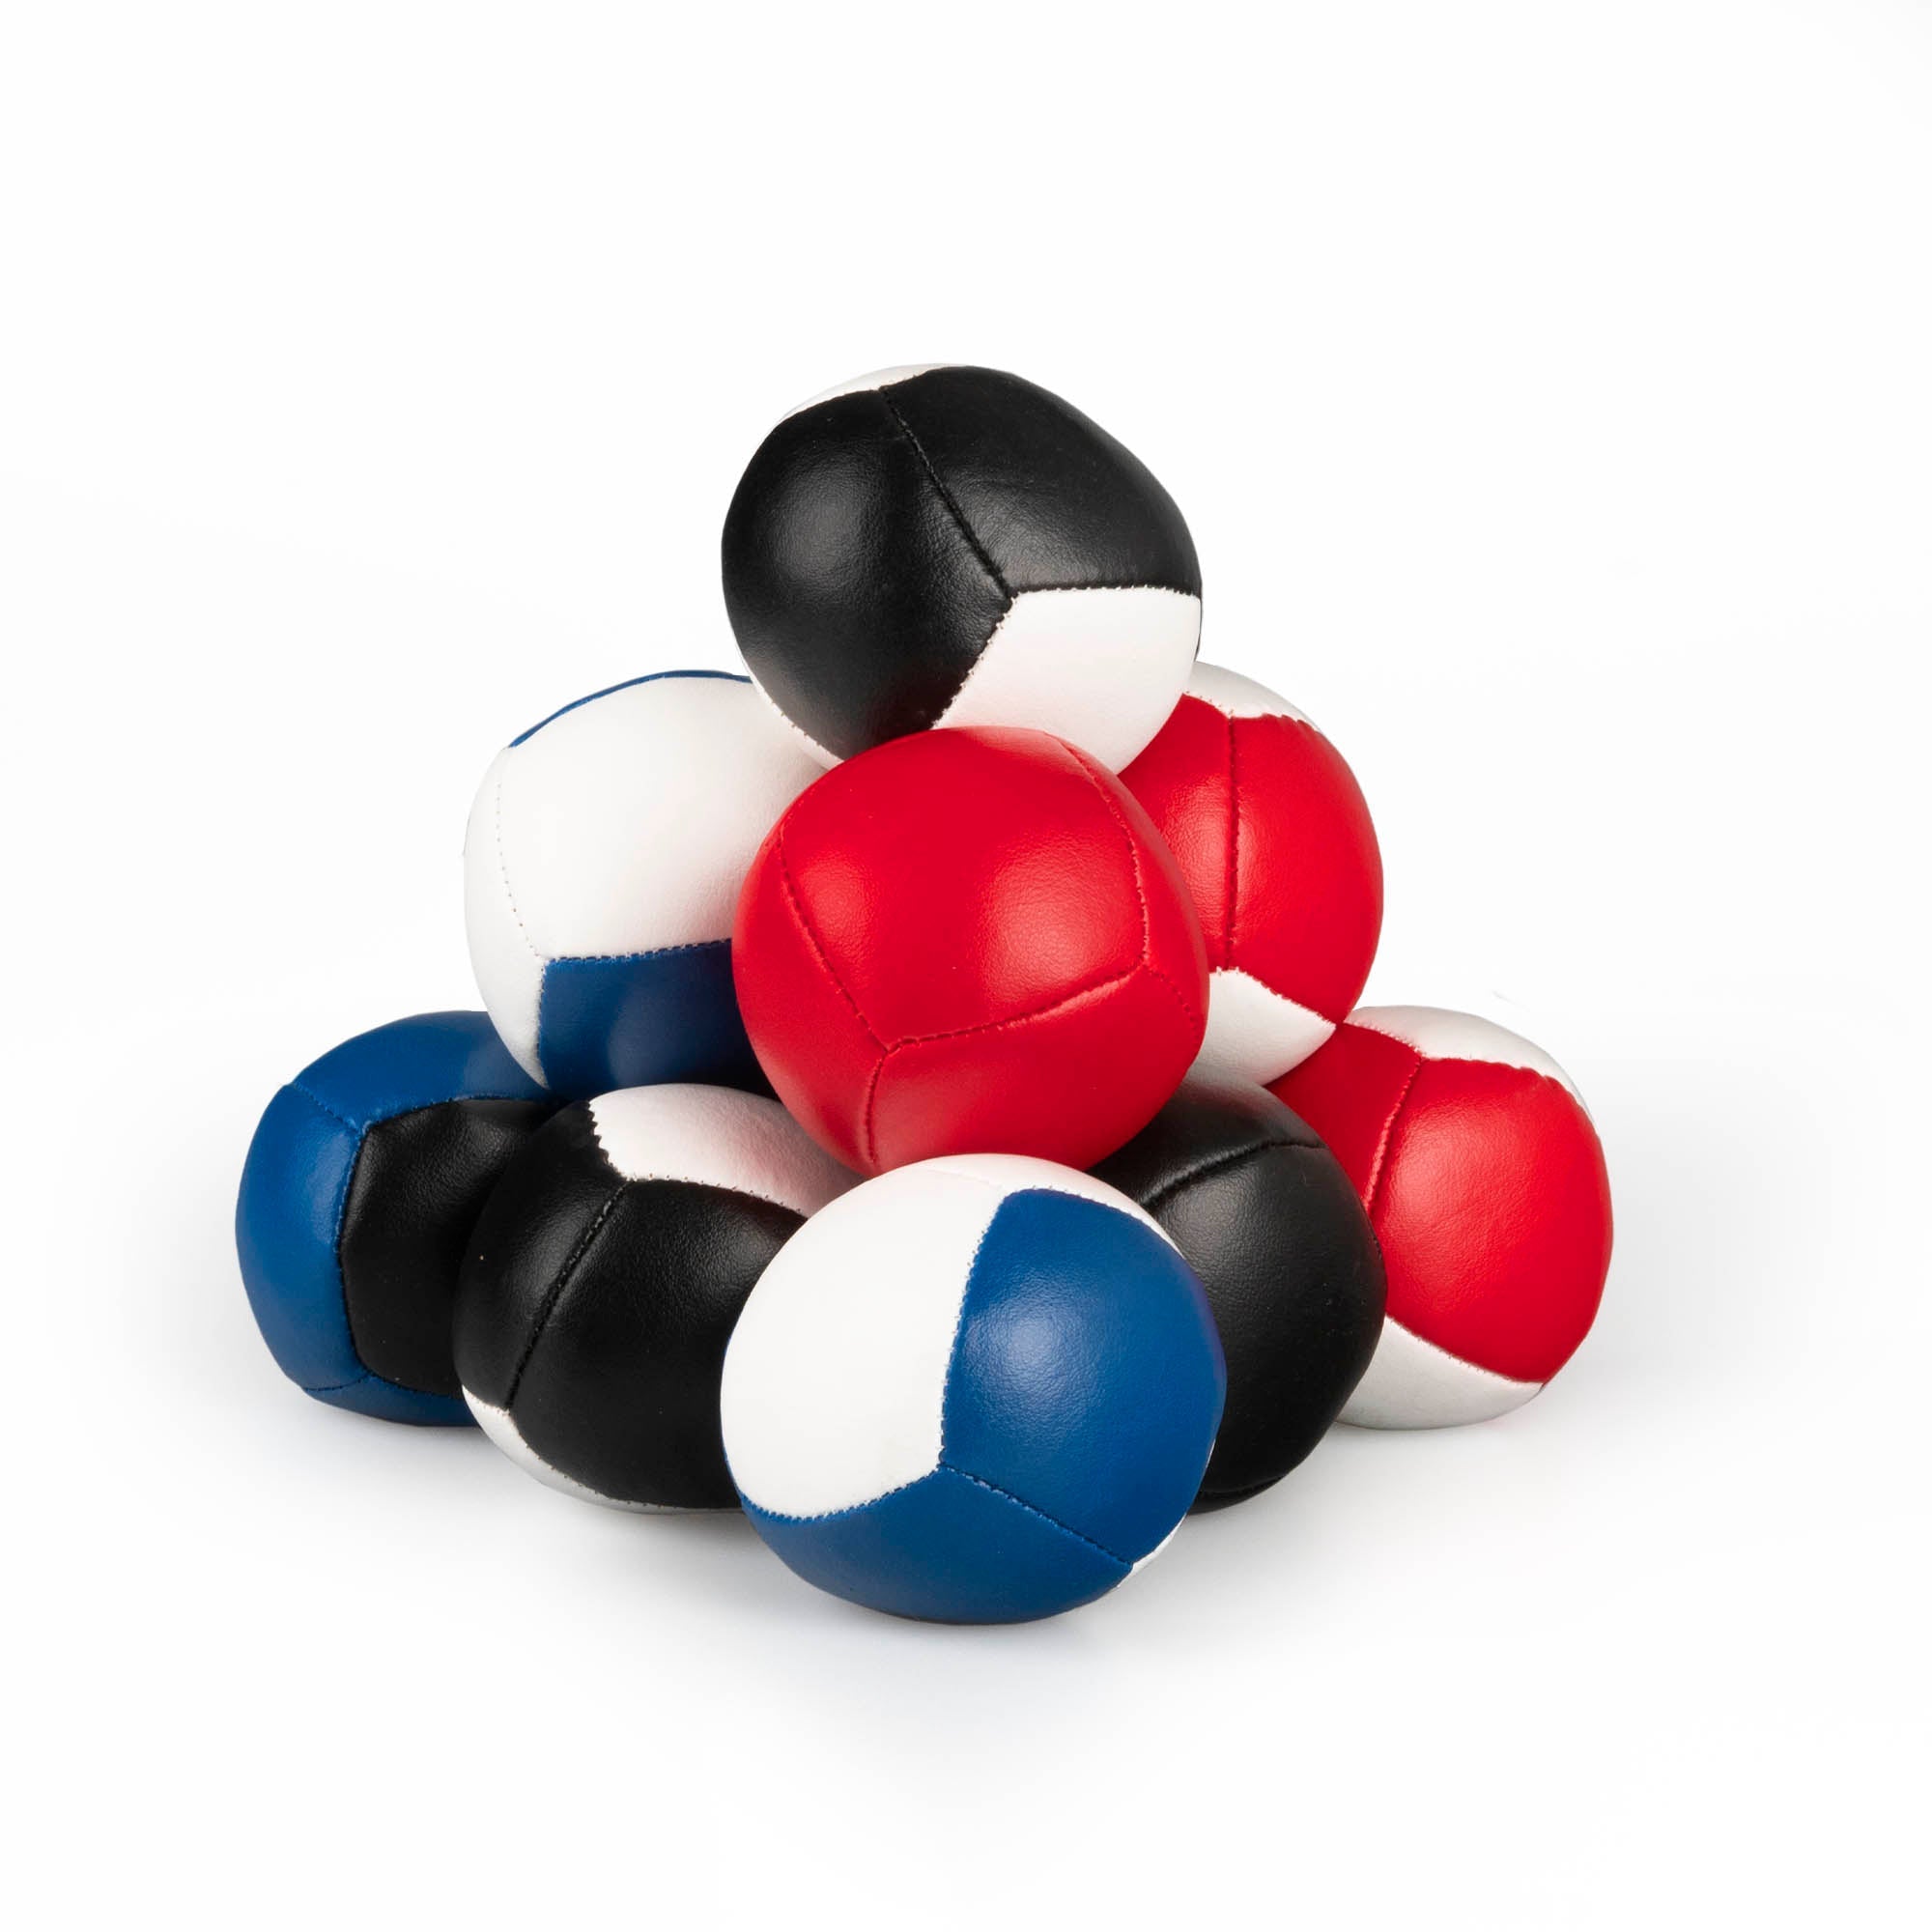 Firetoys thud juggling ball 110g, all colour variants in a bundle 